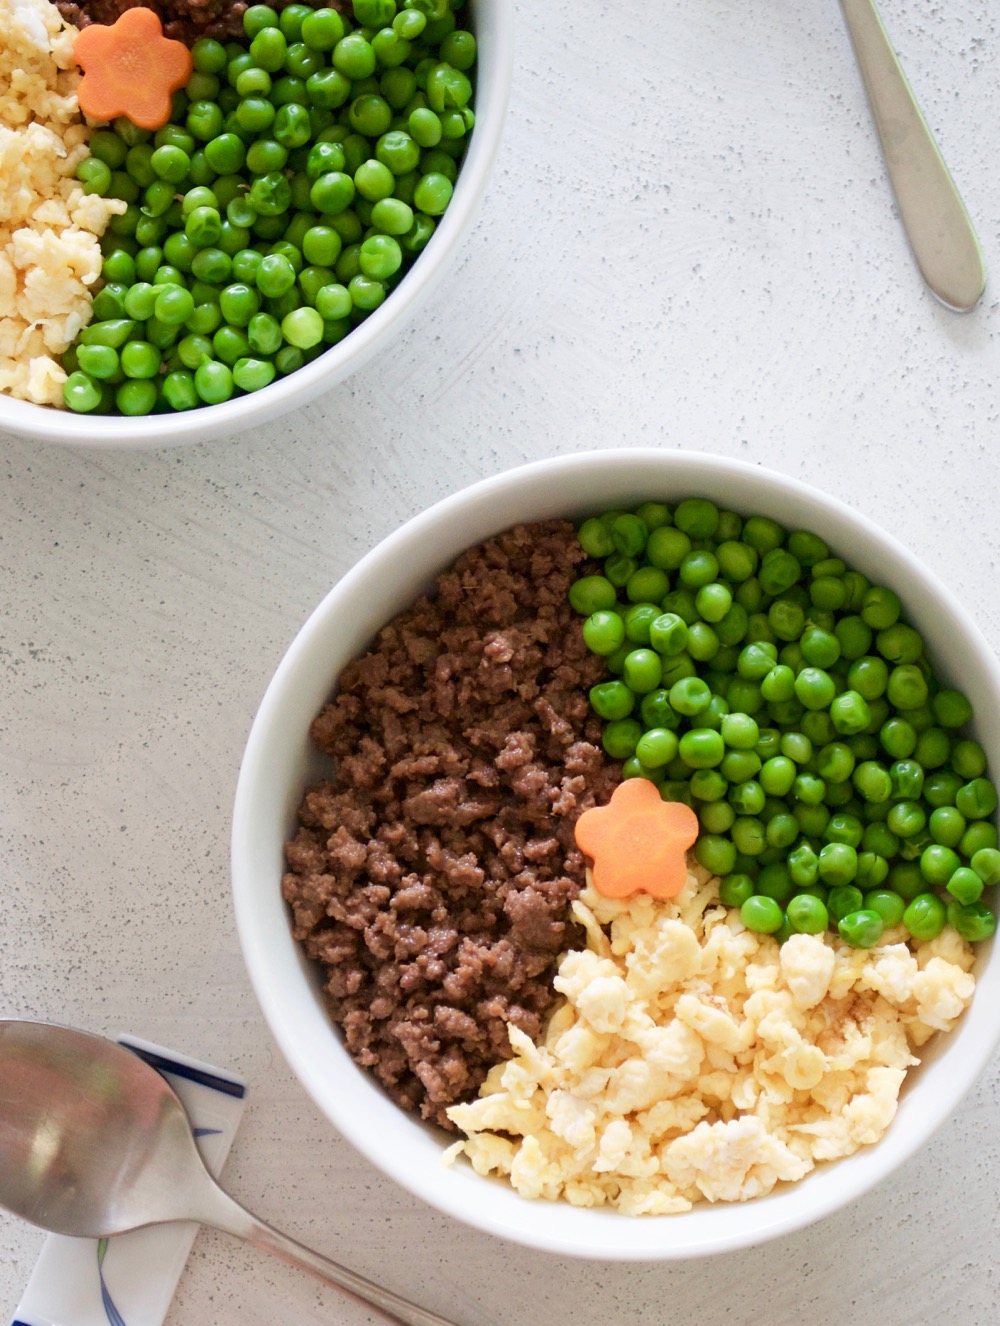 Japanese Rice Bowl (Sanshoku Bento) - Lovely looking rice bowl dish with three toppings - egg, beef mince and peas. You can use pork mince or chicken mince if you like and greens can be chopped snow peas or even spinach. Perfect for kid's lunch! https://japan.recipetineats.com